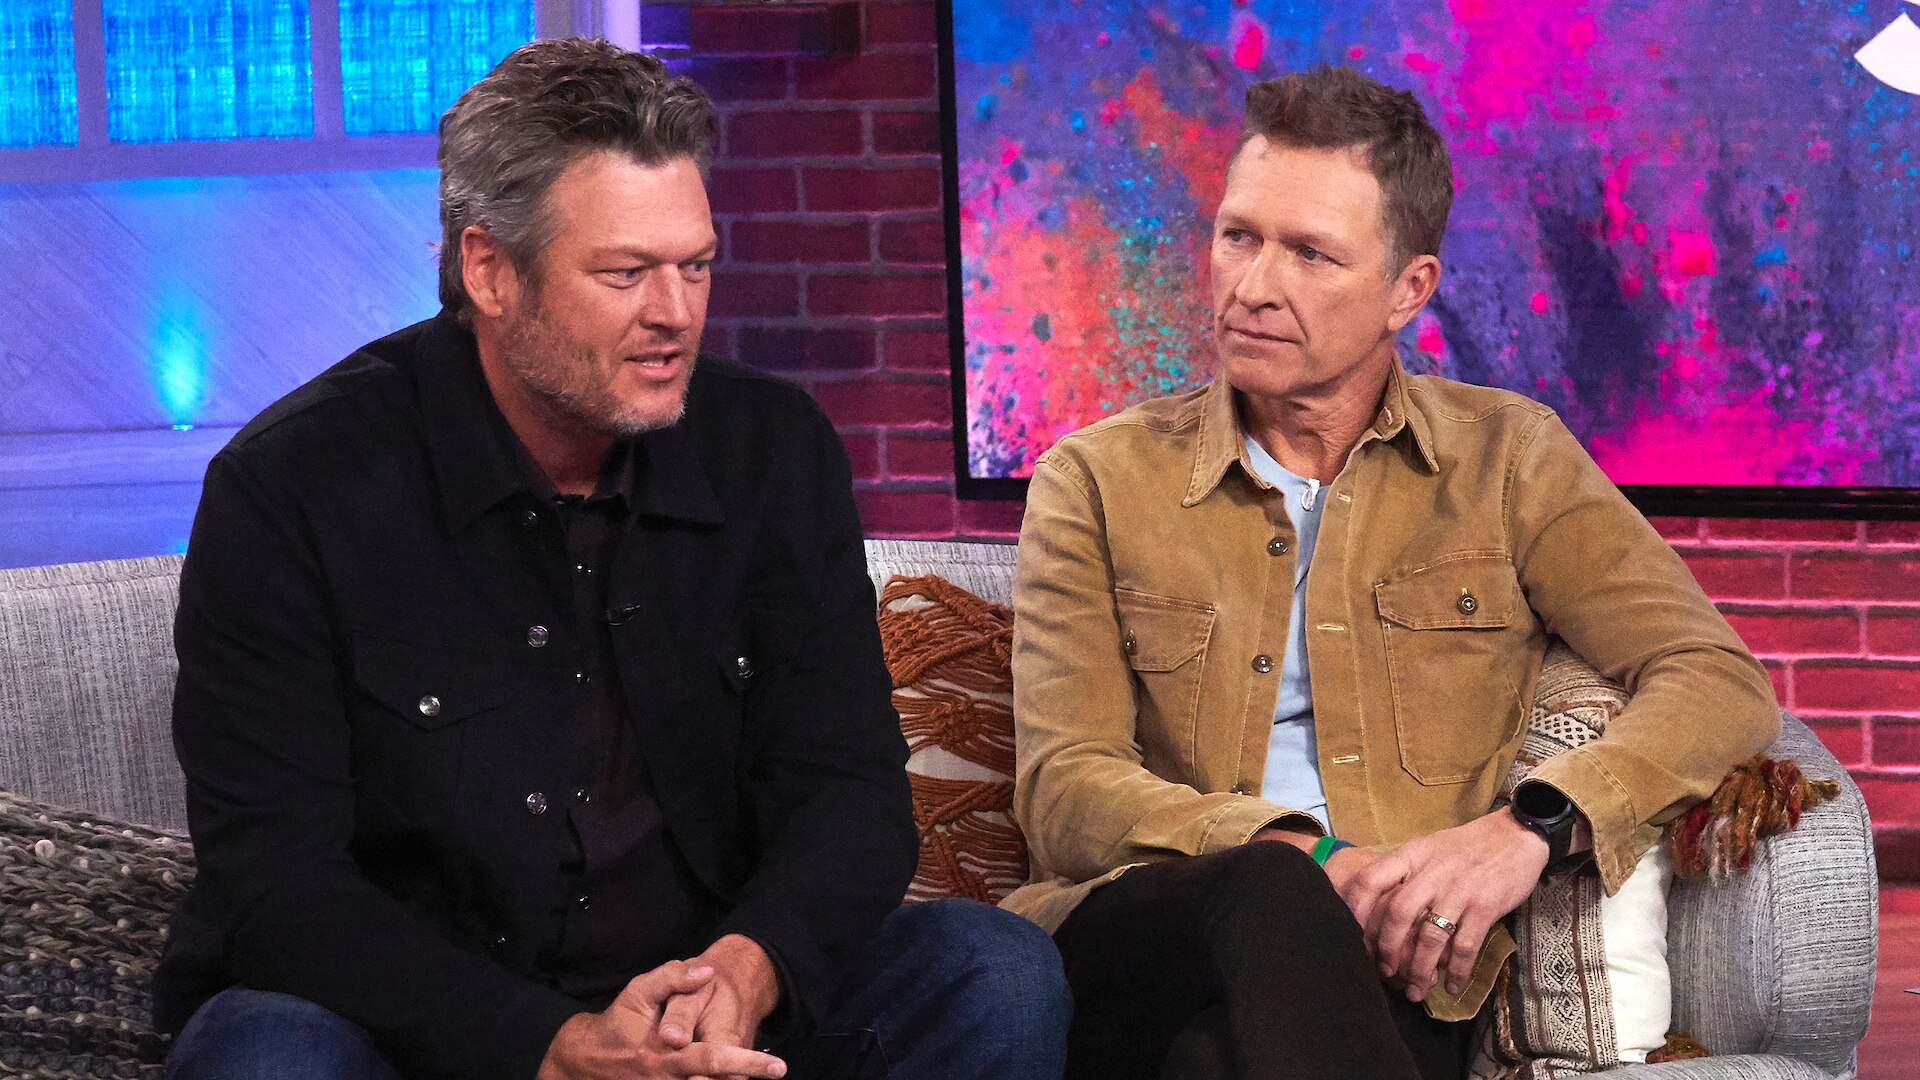 Watch The Kelly Clarkson Show Highlight Blake Shelton Surprises Craig Morgan To Share How His 